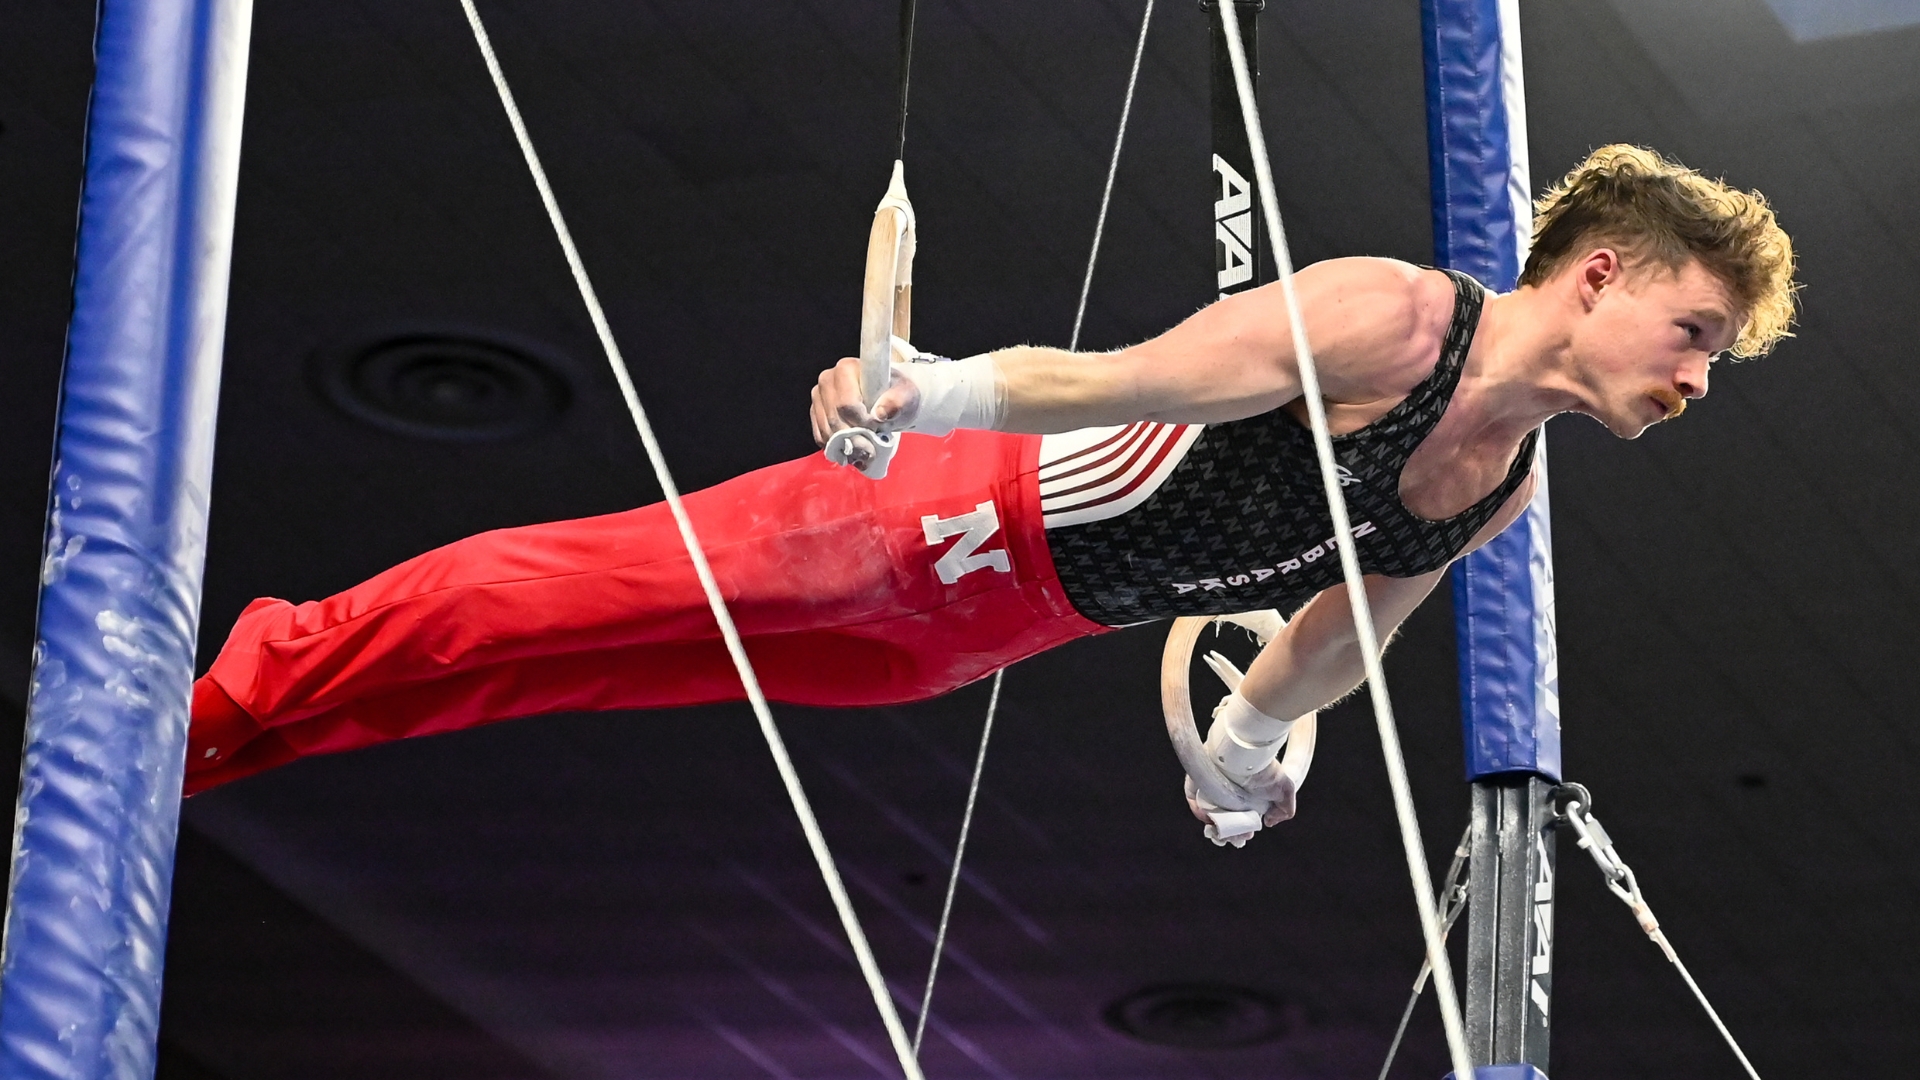 Nebraska's Liam Doherty-Herwitz competes on rings during the semifinals of the 2022 NCAA Men's Gymnastics Championships.